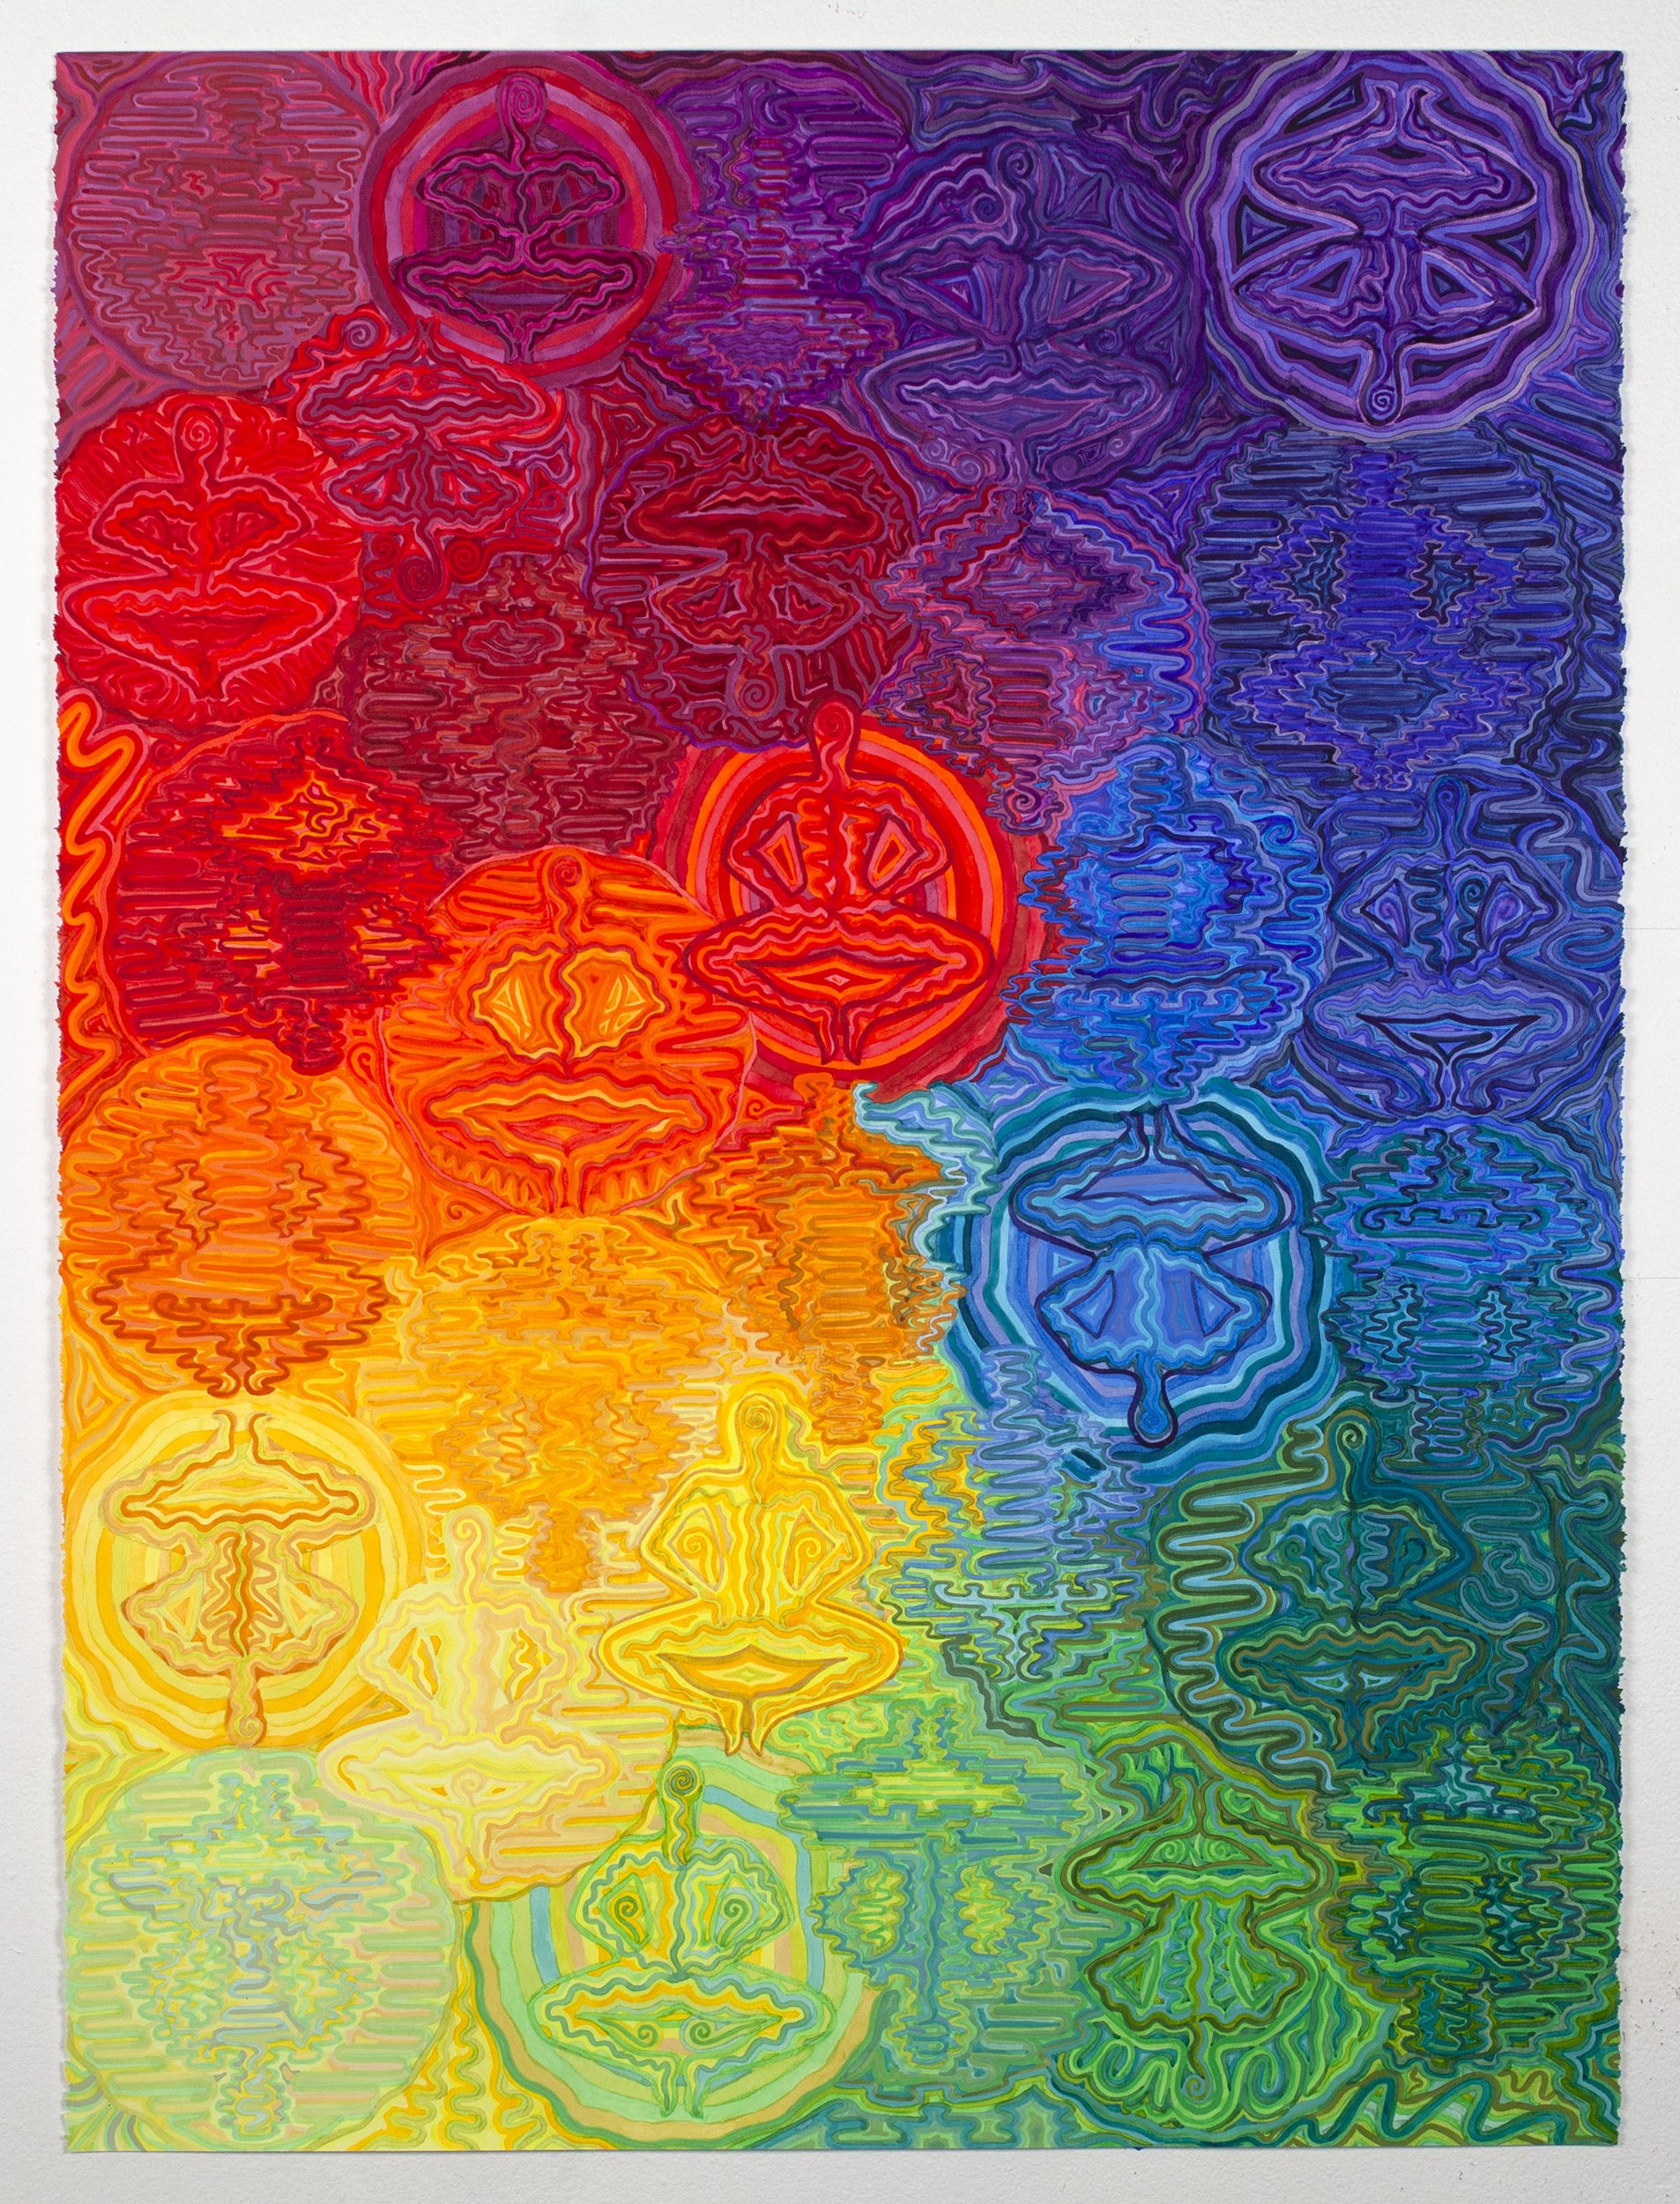 Rainbow of emotions / reflections